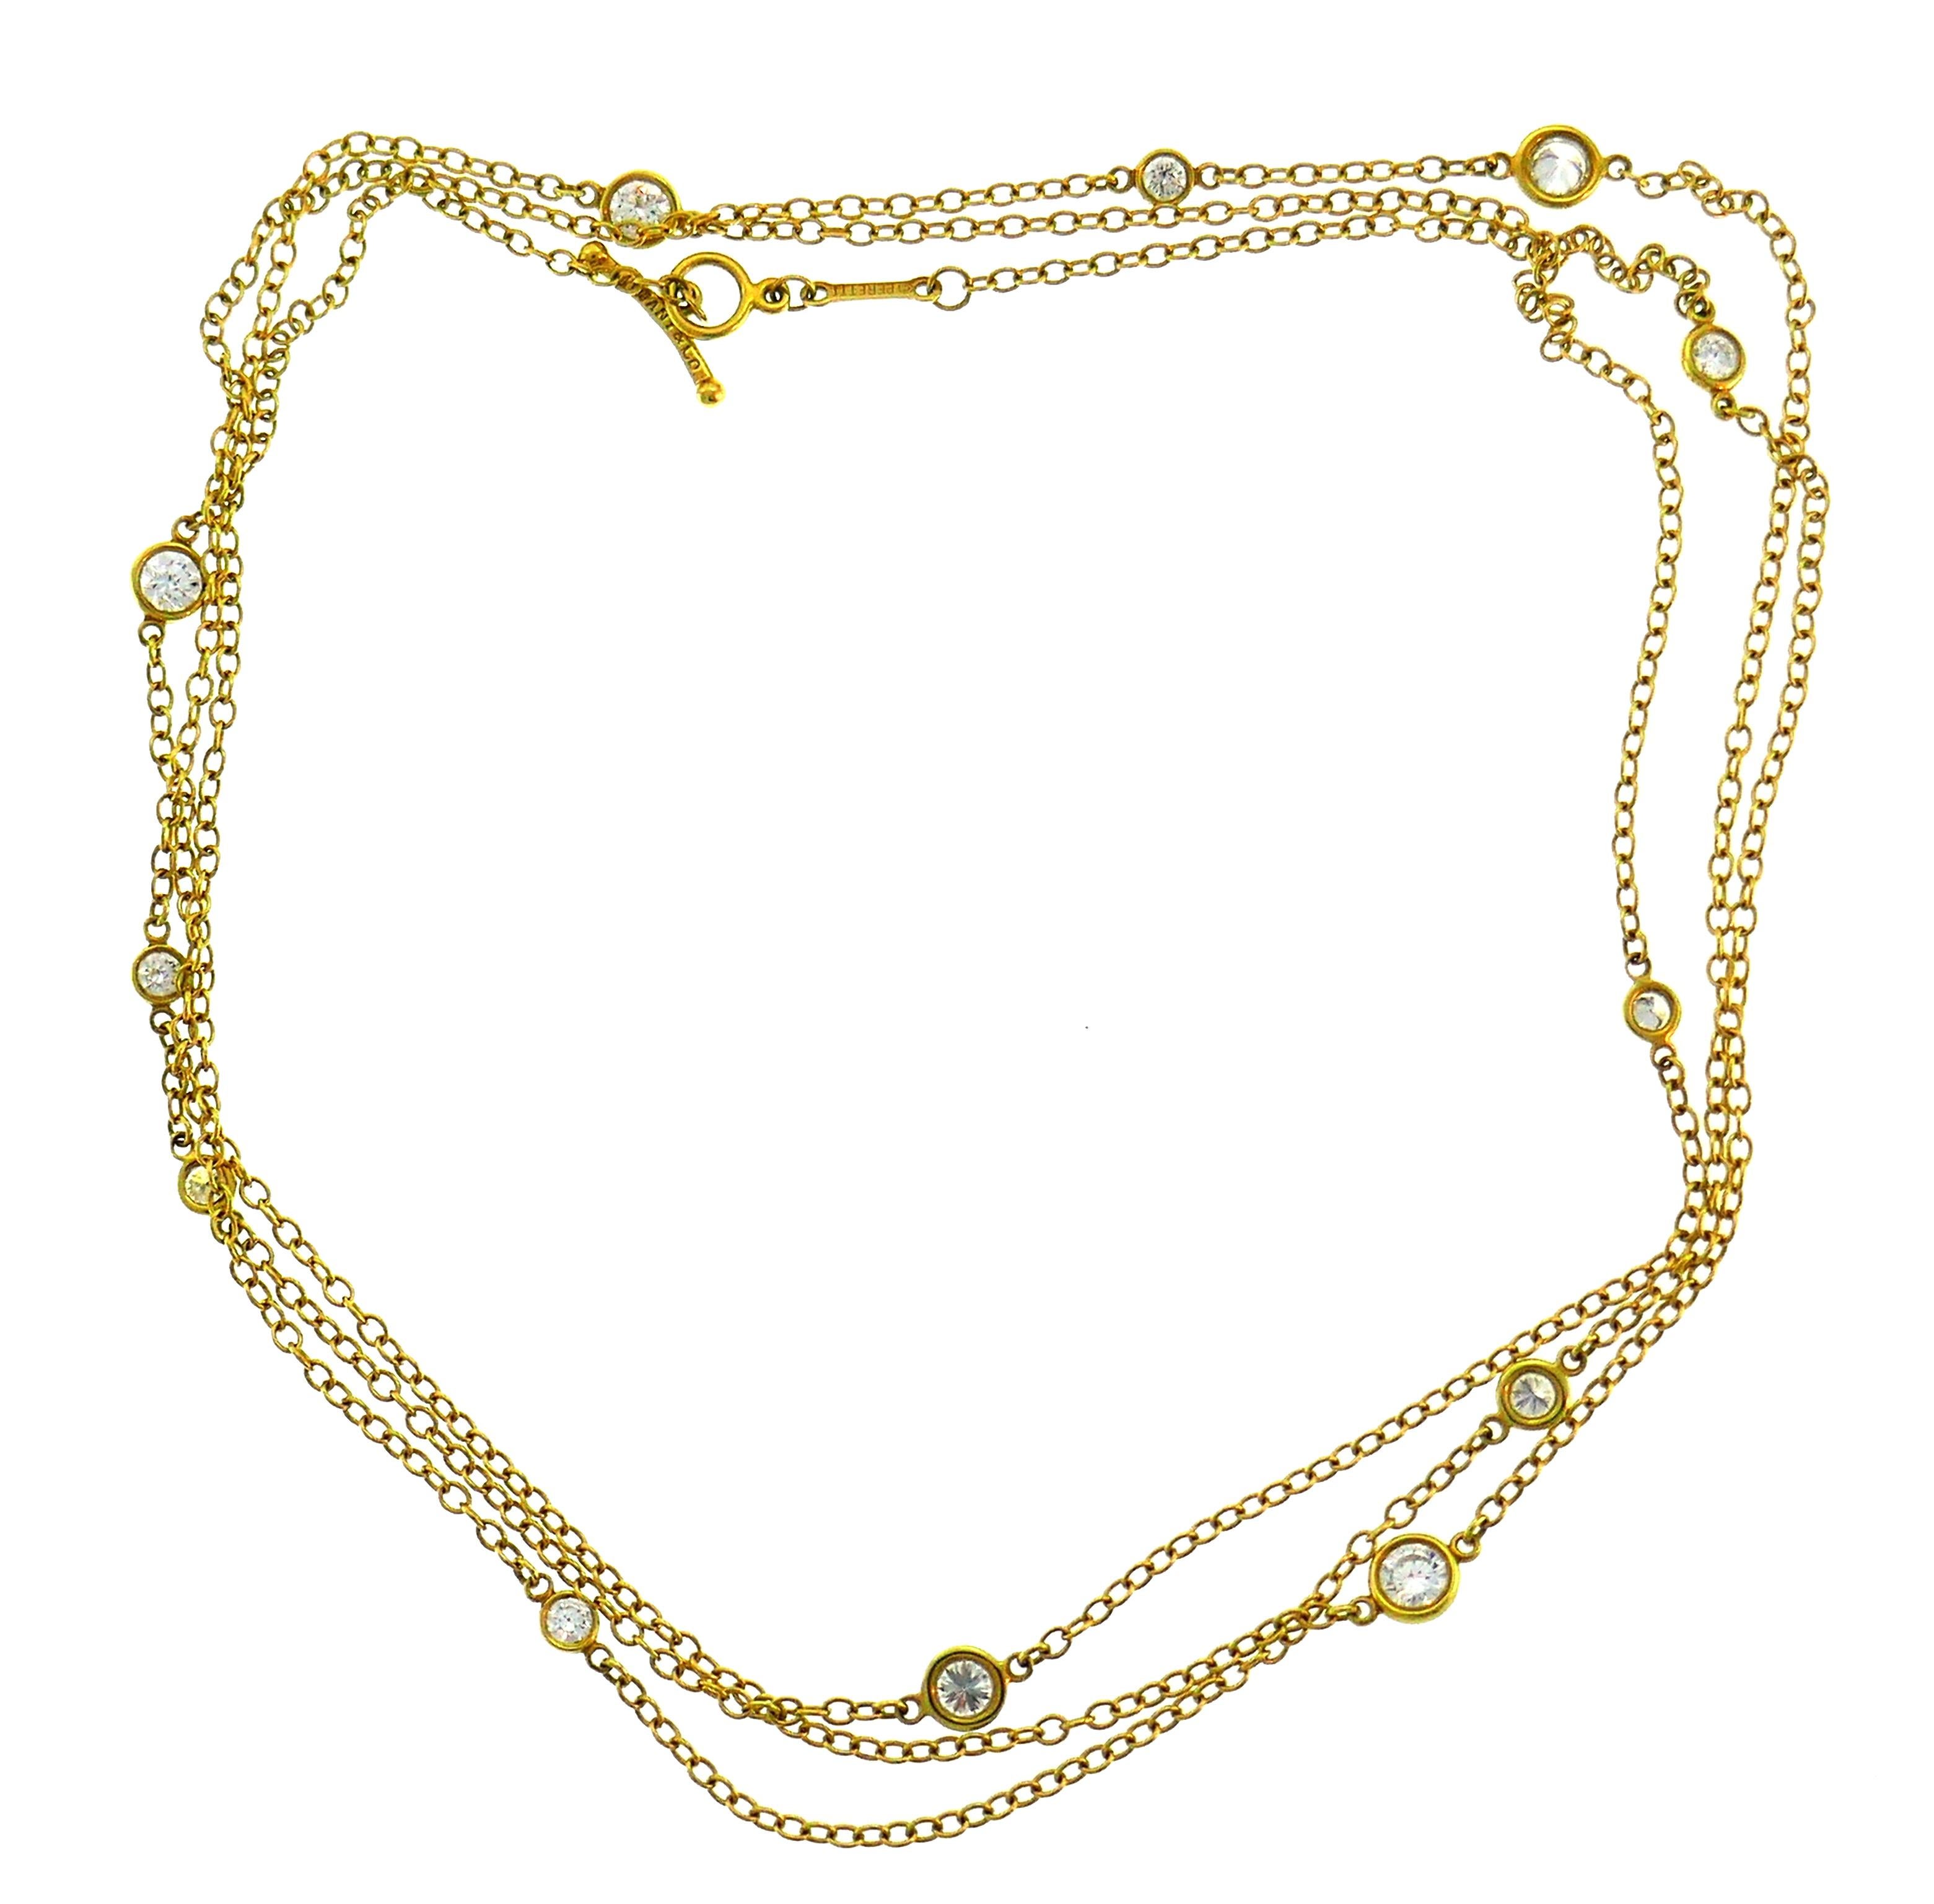 Signature Diamonds by the Yard Sprinkle necklace created by Elsa Peretti for Tiffany & Co. Elegant, feminine and wearable, the necklace is a great addition to your jewelry collection. 
The necklace is made of 18 karat yellow gold and set with twelve